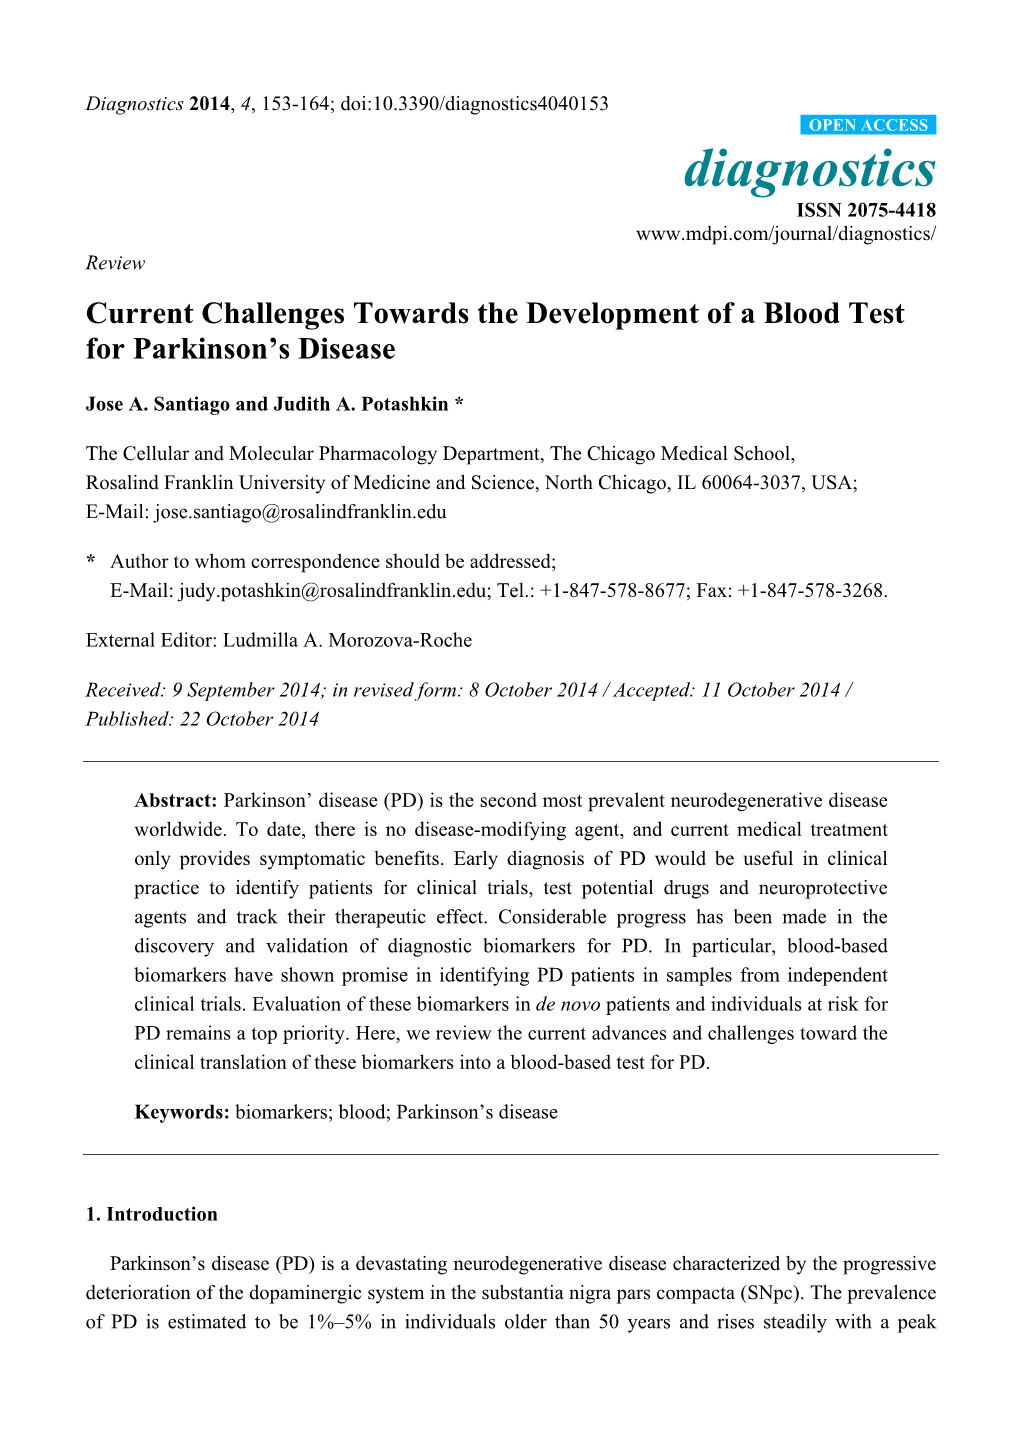 Current Challenges Towards the Development of a Blood Test for Parkinson’S Disease